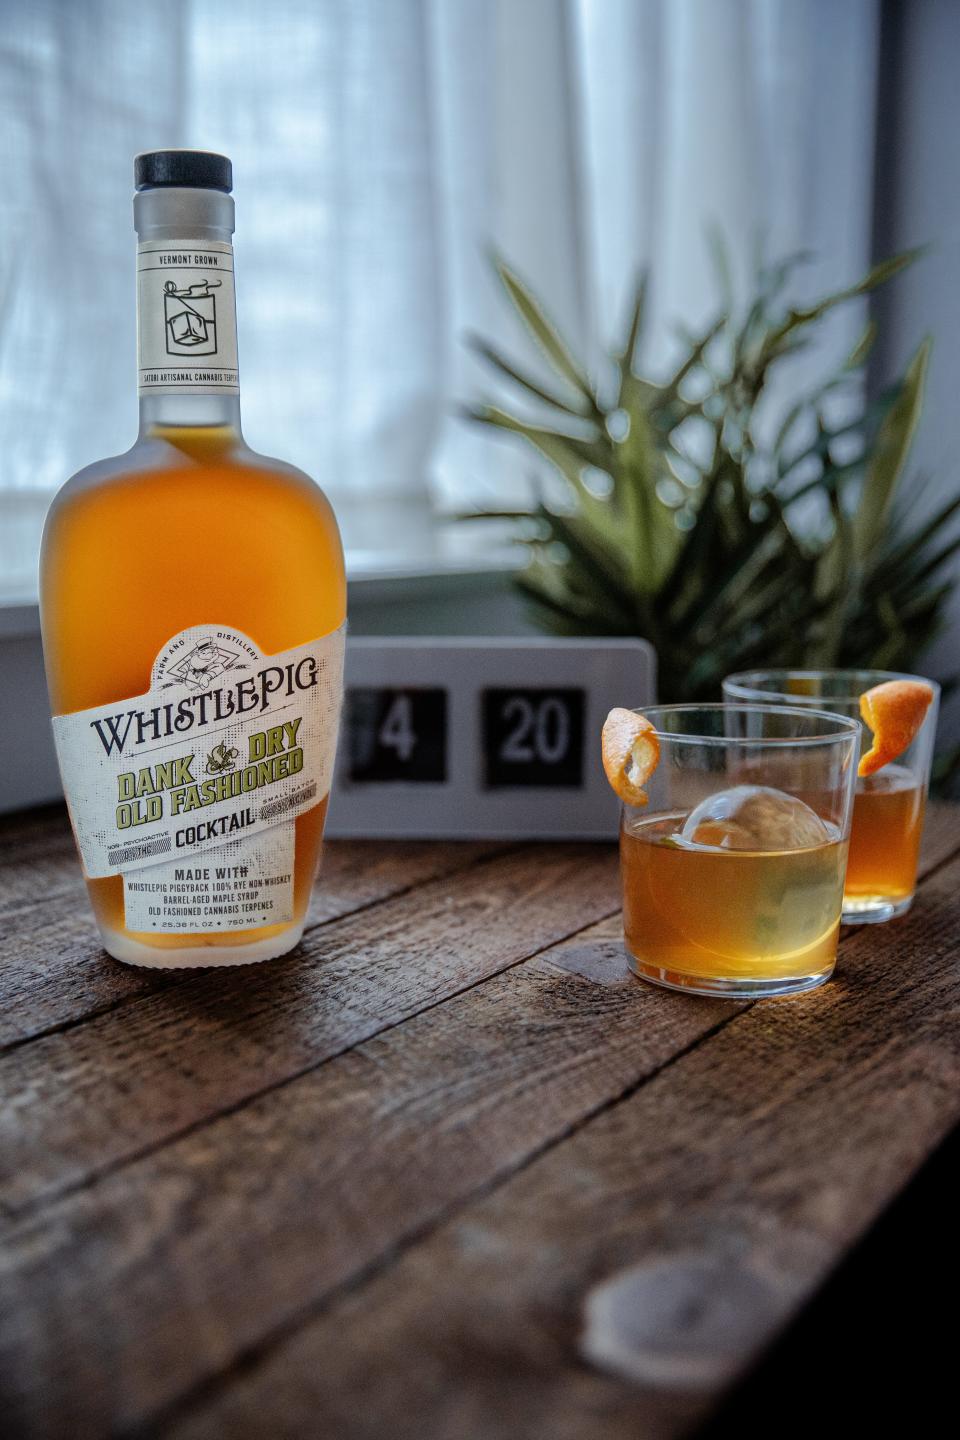 WhistlePig's Dank & Dry Maple Old Fashioned non-alcoholic cocktail is made with 100% Rye non-whiskey and barrel-aged maple syrup.